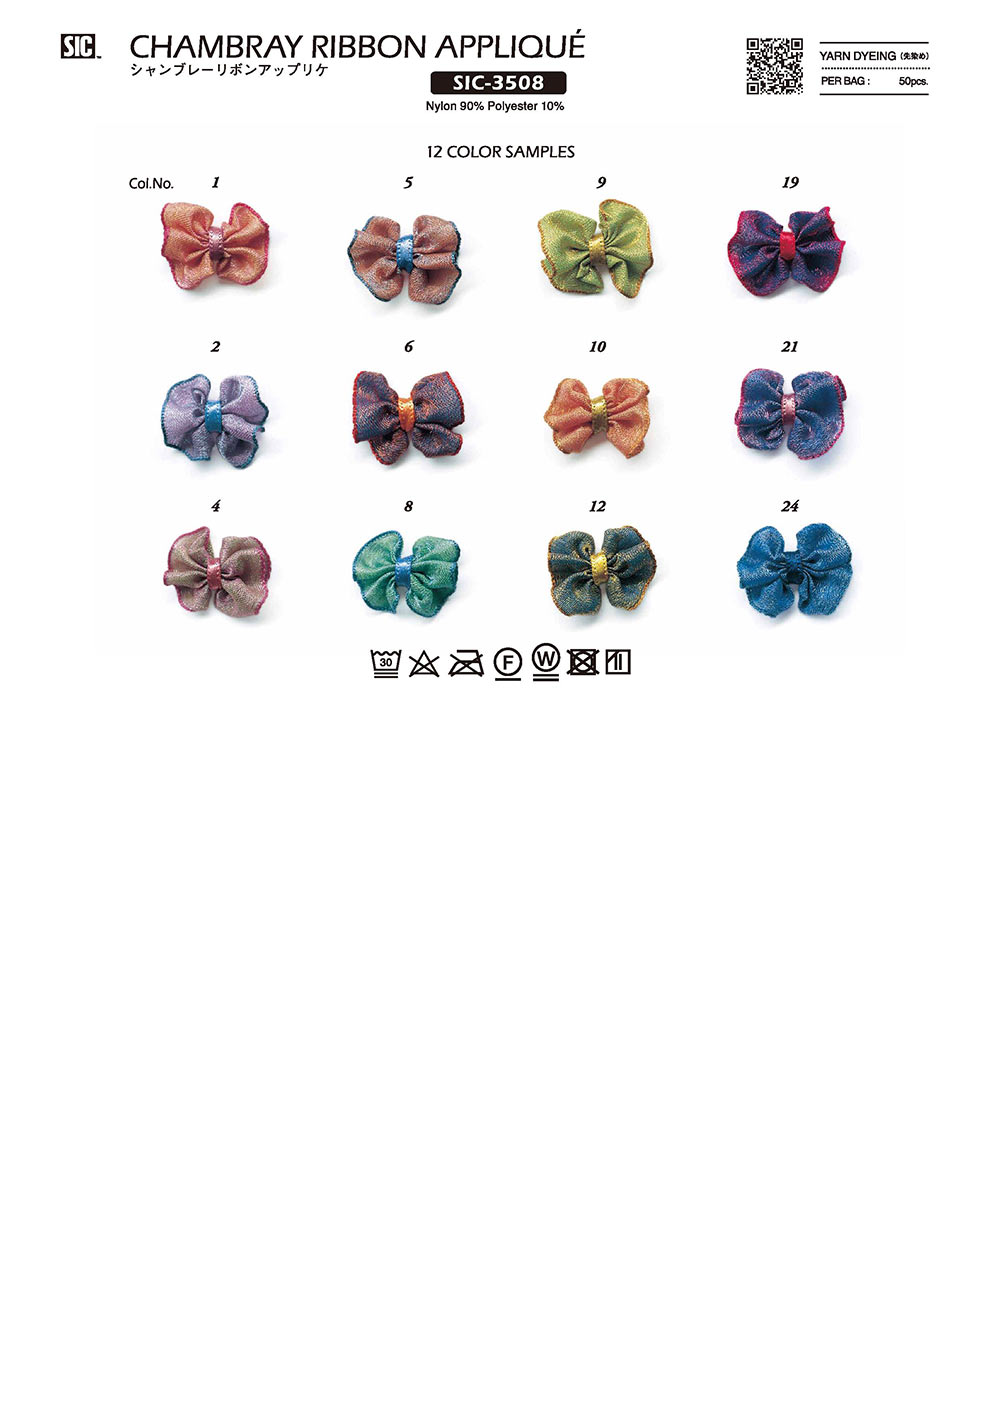 SIC-3508 Chambray Ribbon Applique[Miscellaneous Goods And Others] SHINDO(SIC)